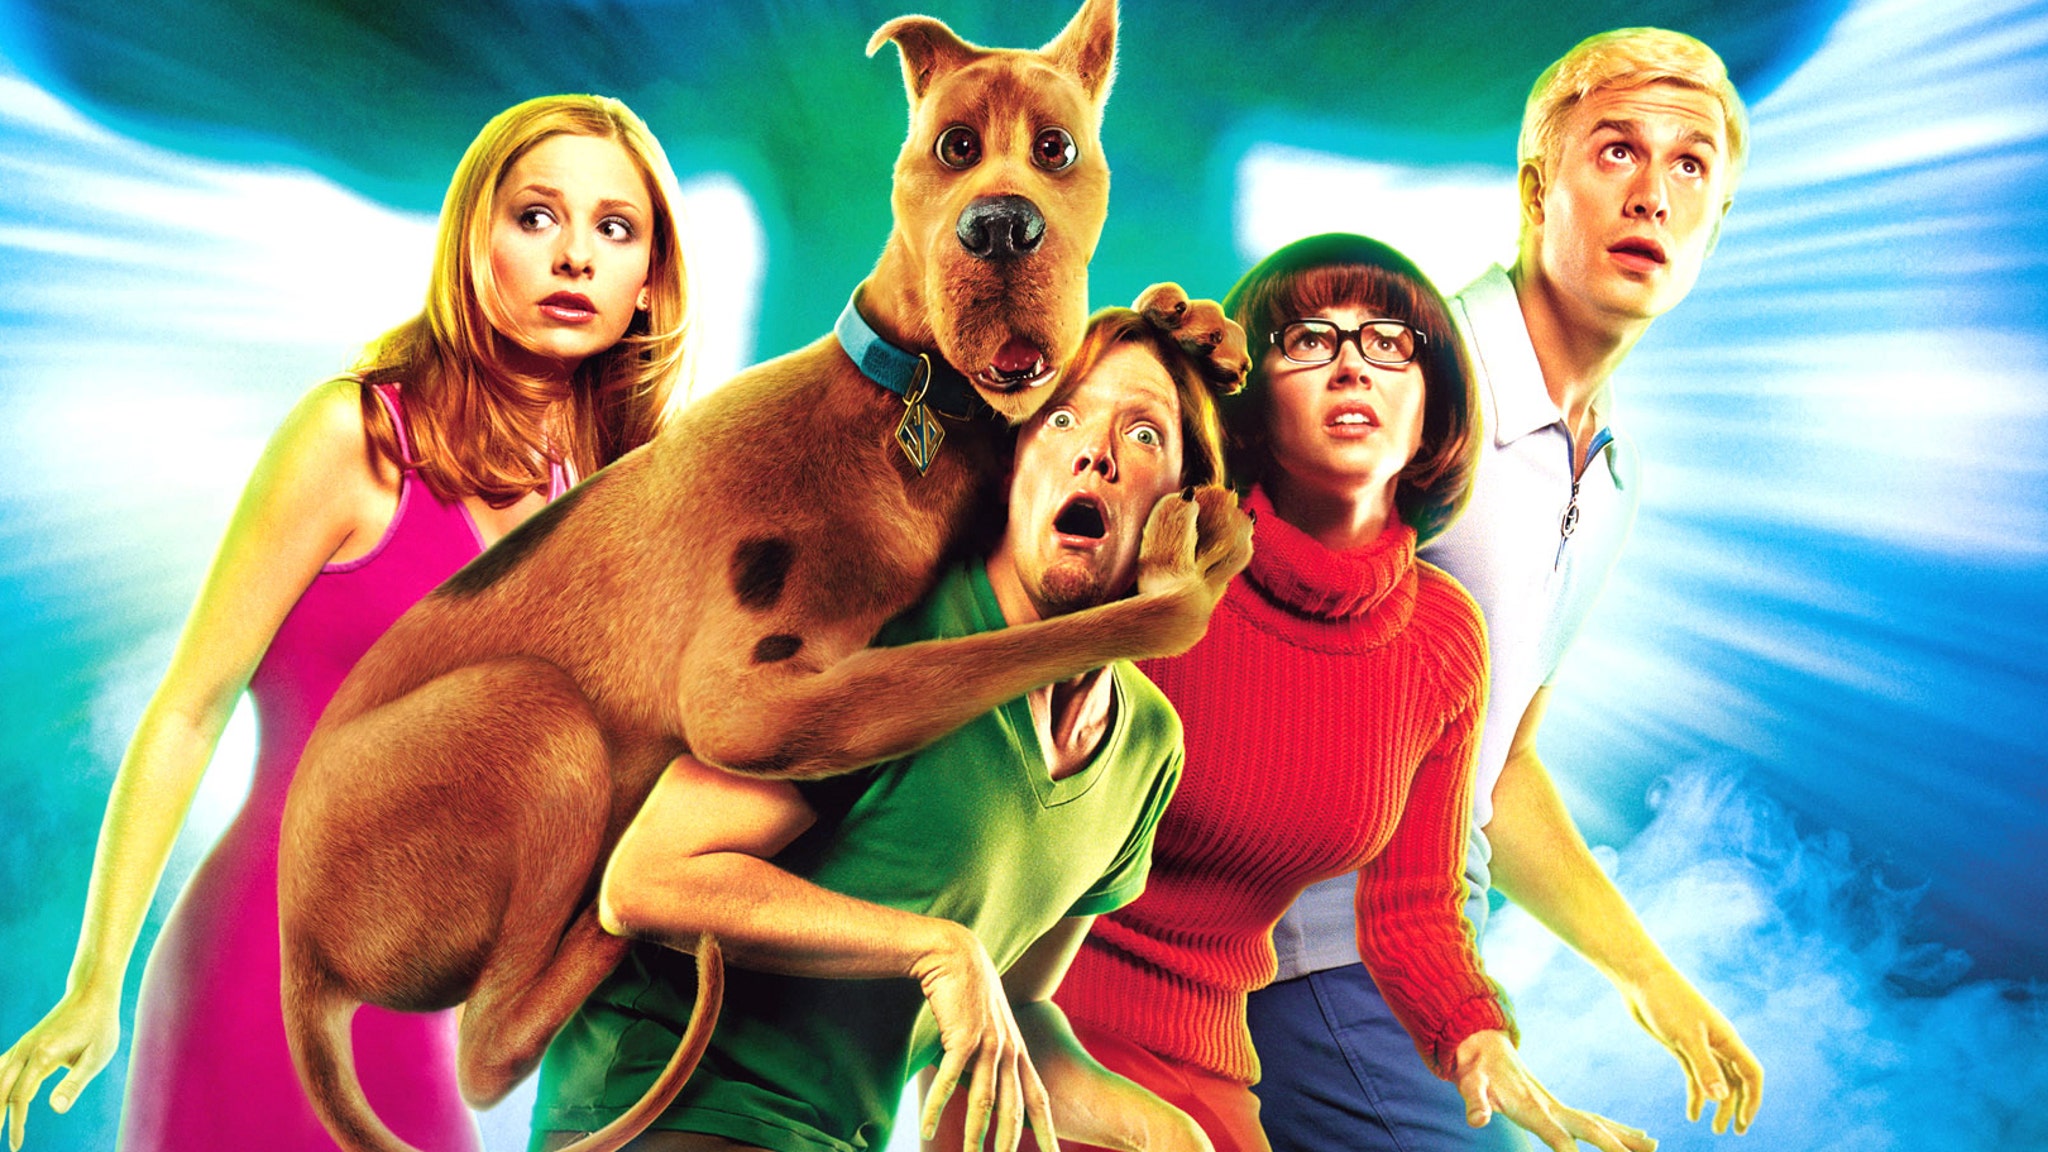 Matthew Lillard Agrees R-Rated Scooby-Doo Film with OG Cast Would Be 'Super Fun Thing to See' (Exclusive)